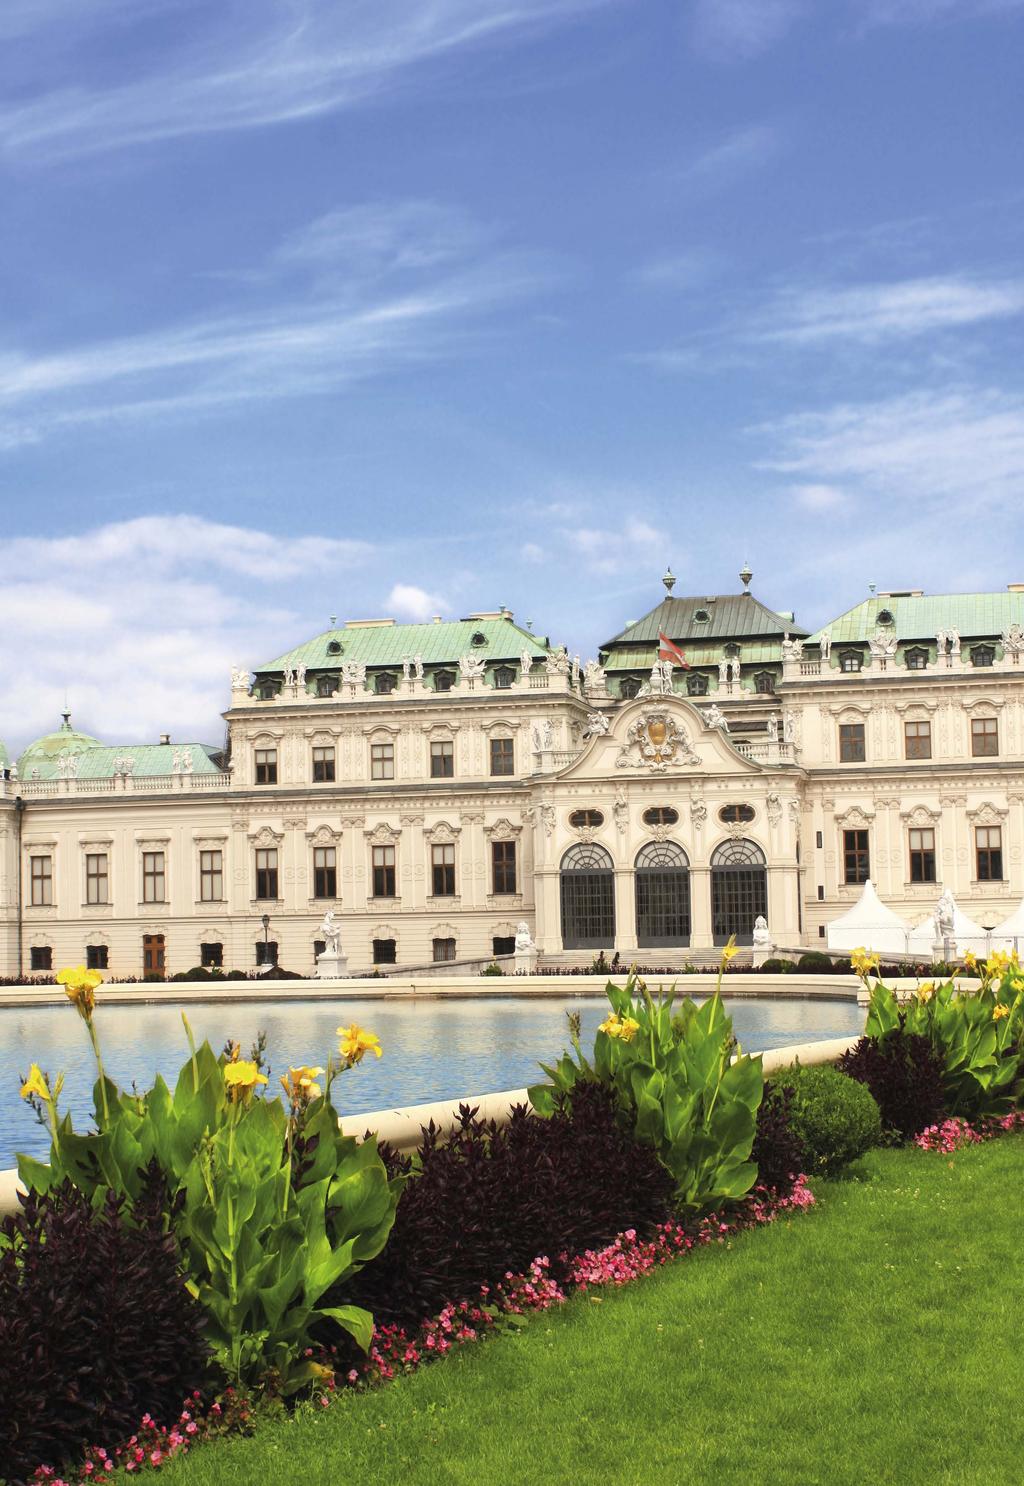 5 Belvedere Palace houses one of